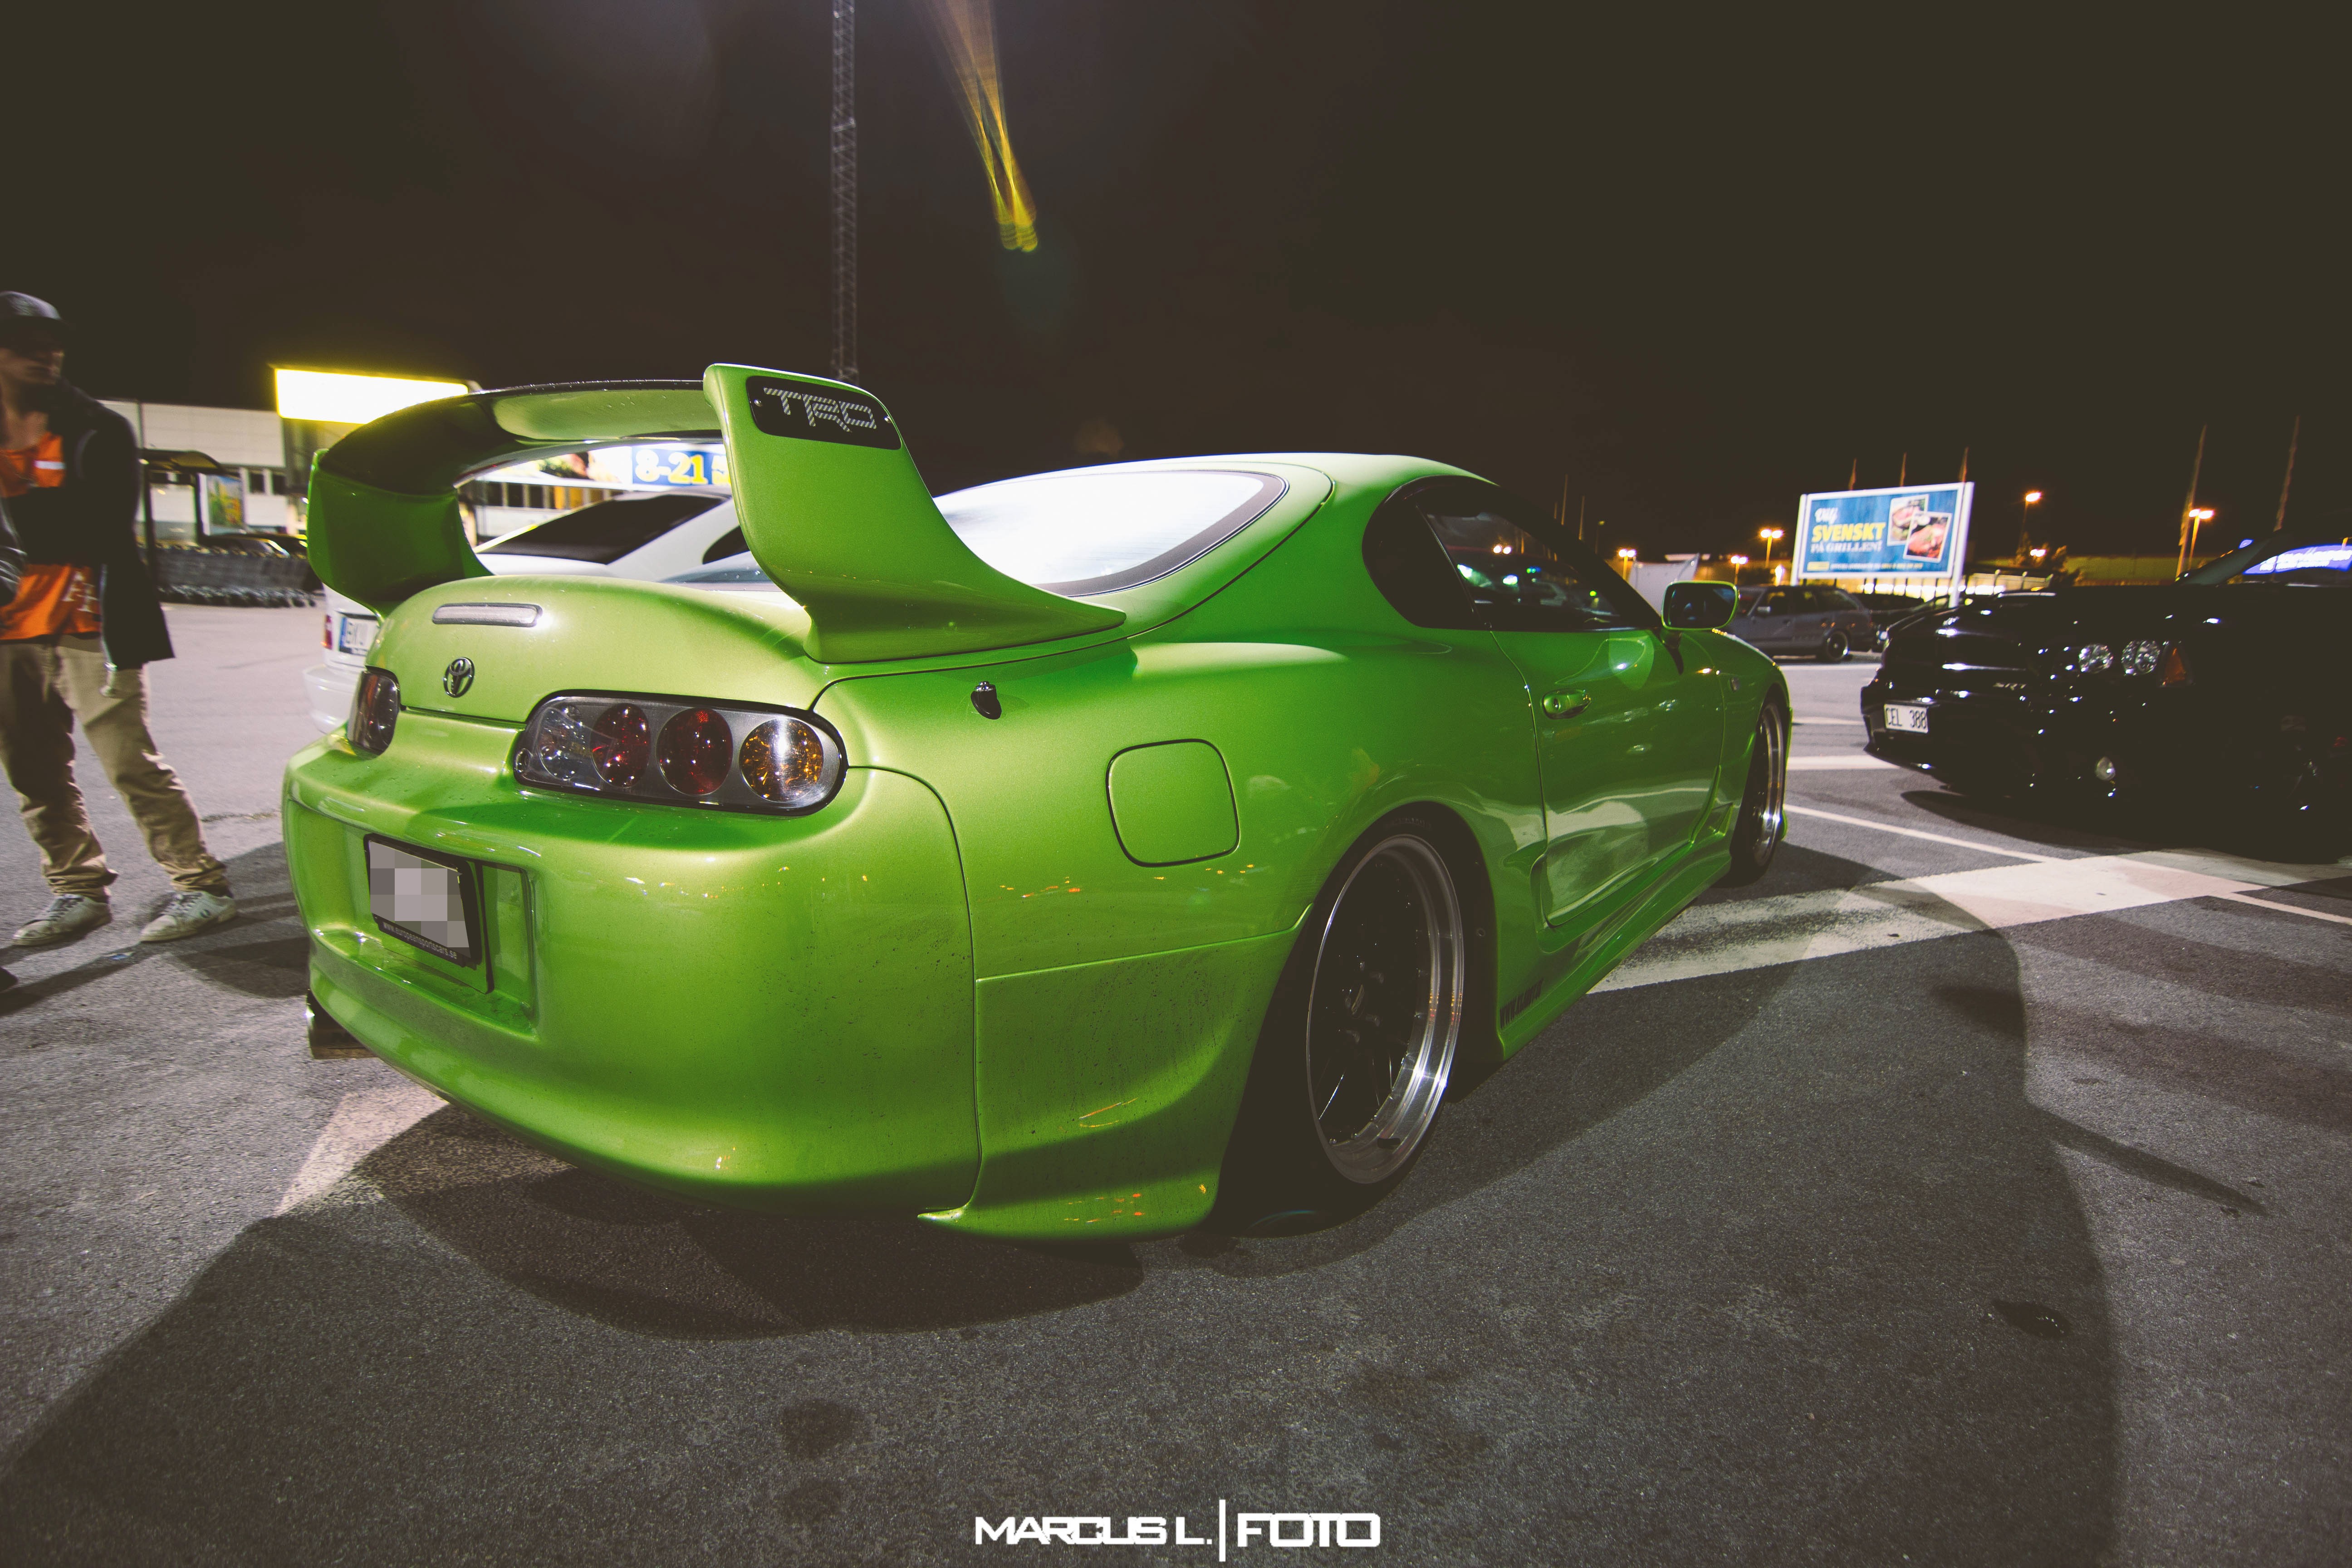 General 5184x3456 car colored wheels Toyota Supra Toyota Supra A80 rear wing Toyota sports car Japanese cars green cars vehicle